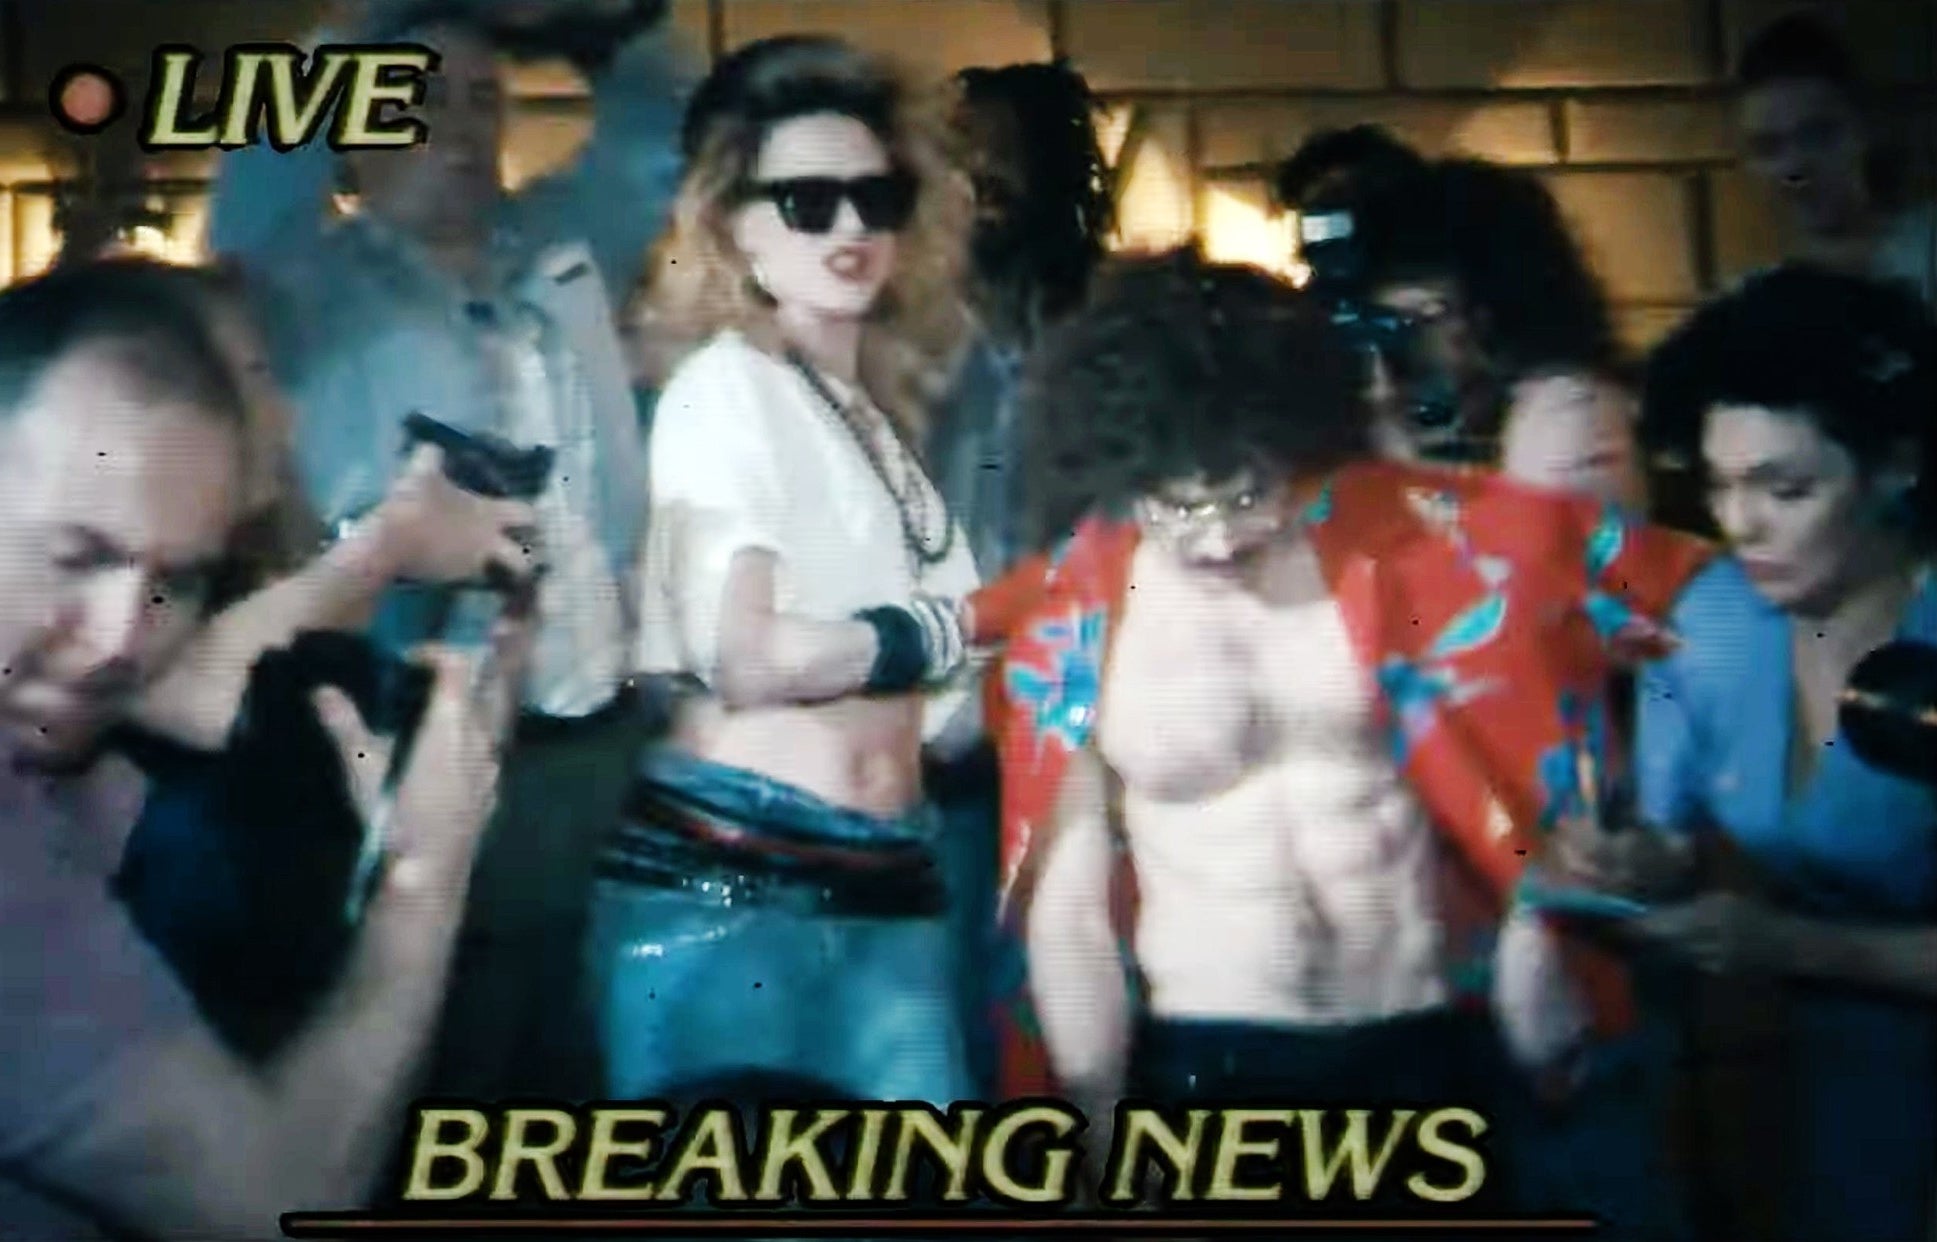 Al and Madonna shown on the news being mobbed by paparazzi as they walk out of a building in a scene from the film